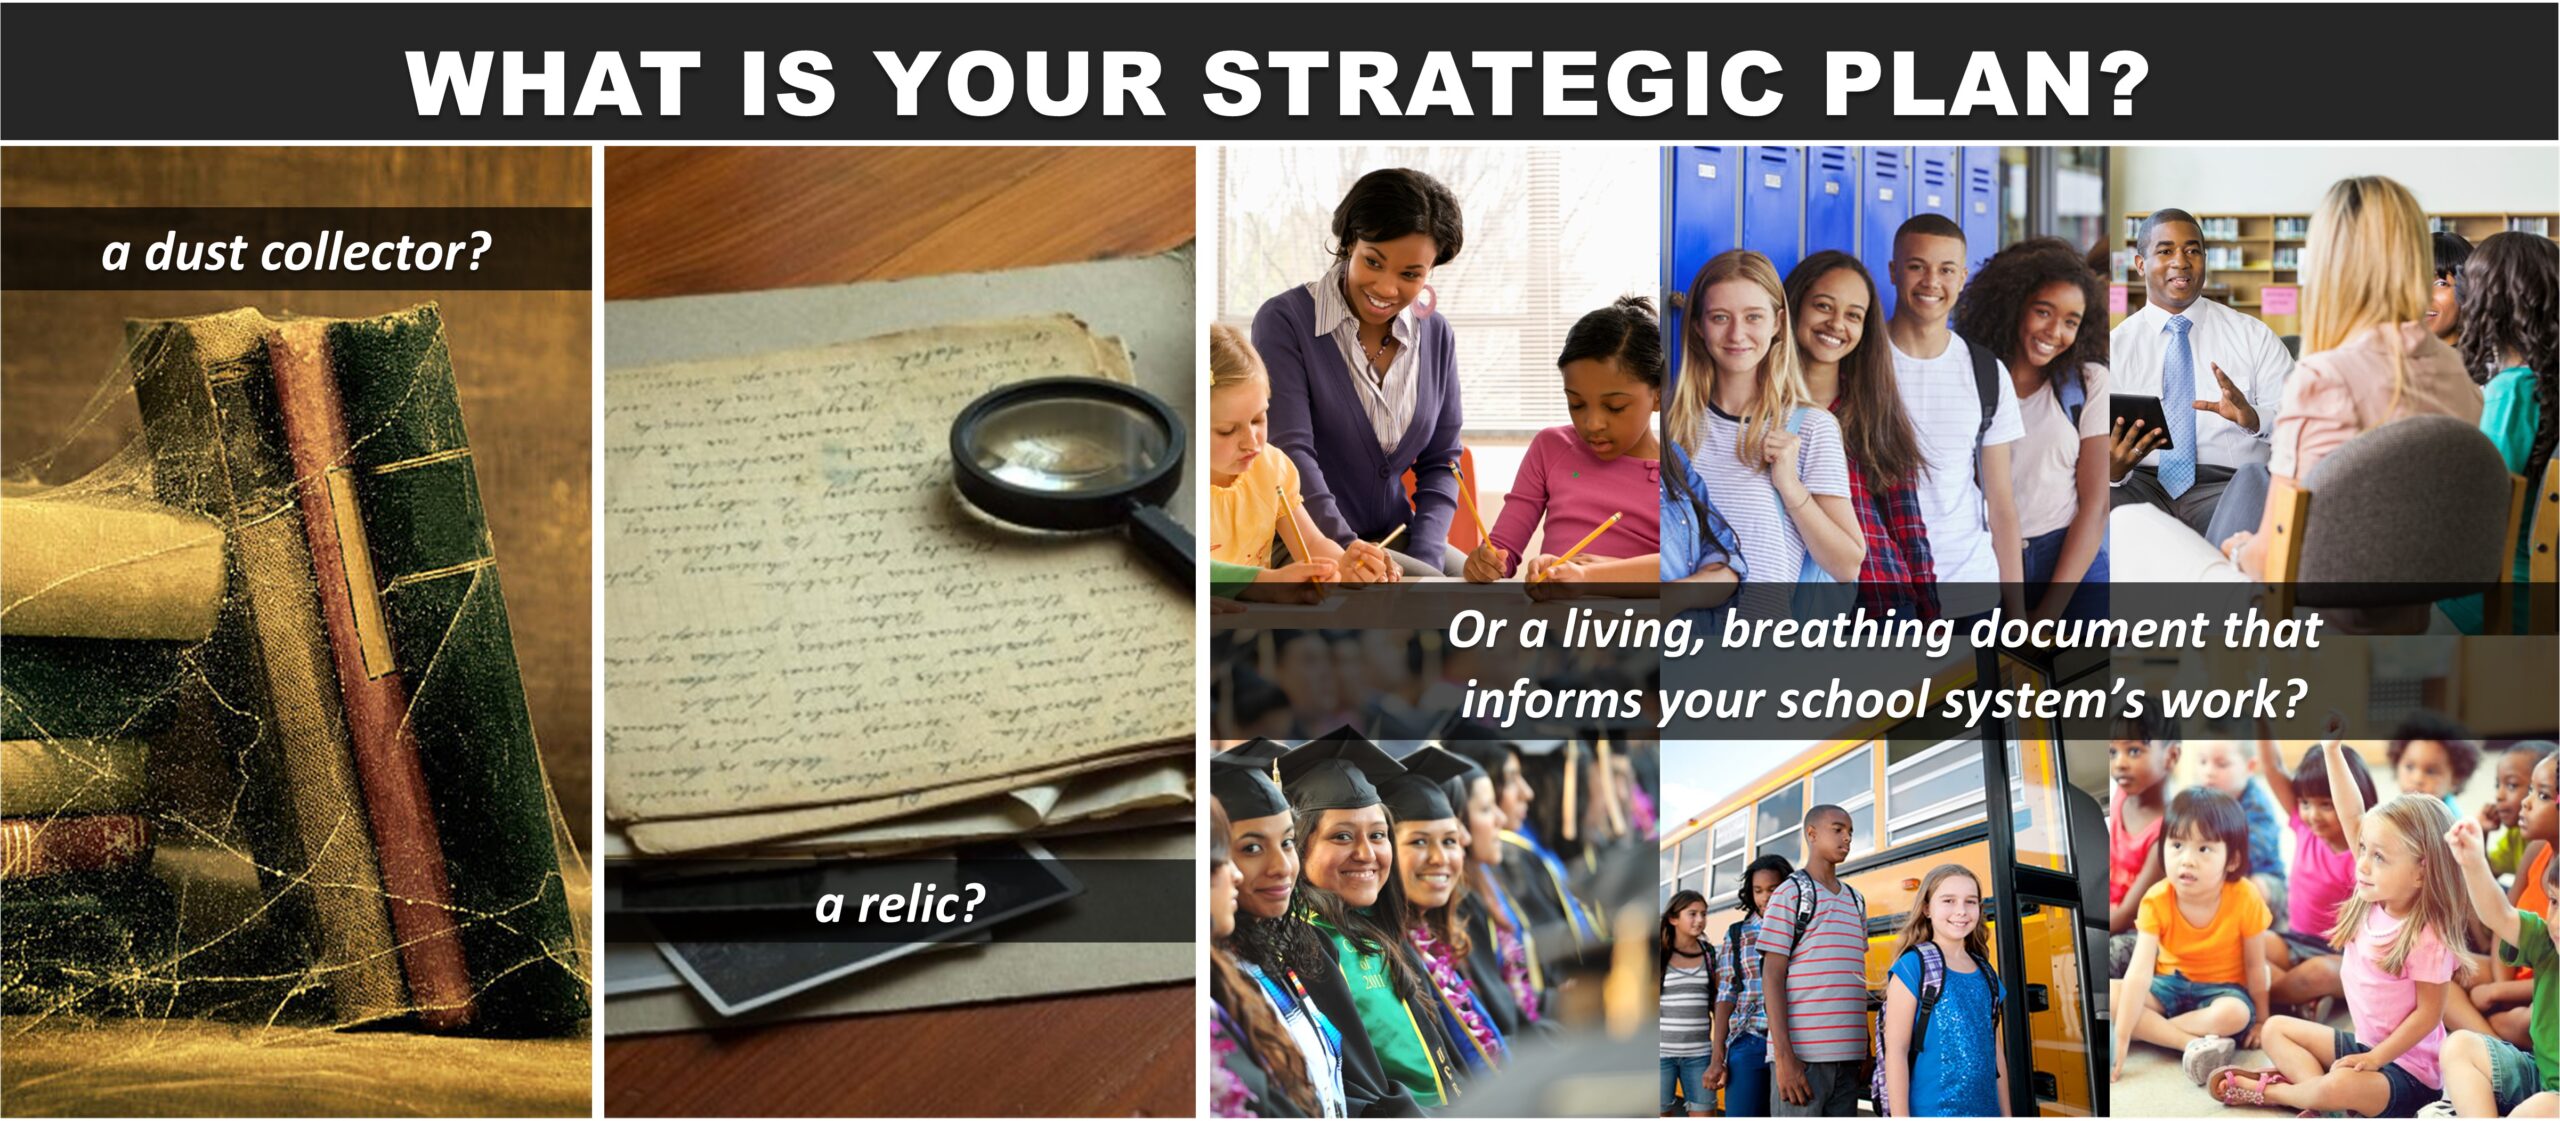 What is Your Strategic Plan?